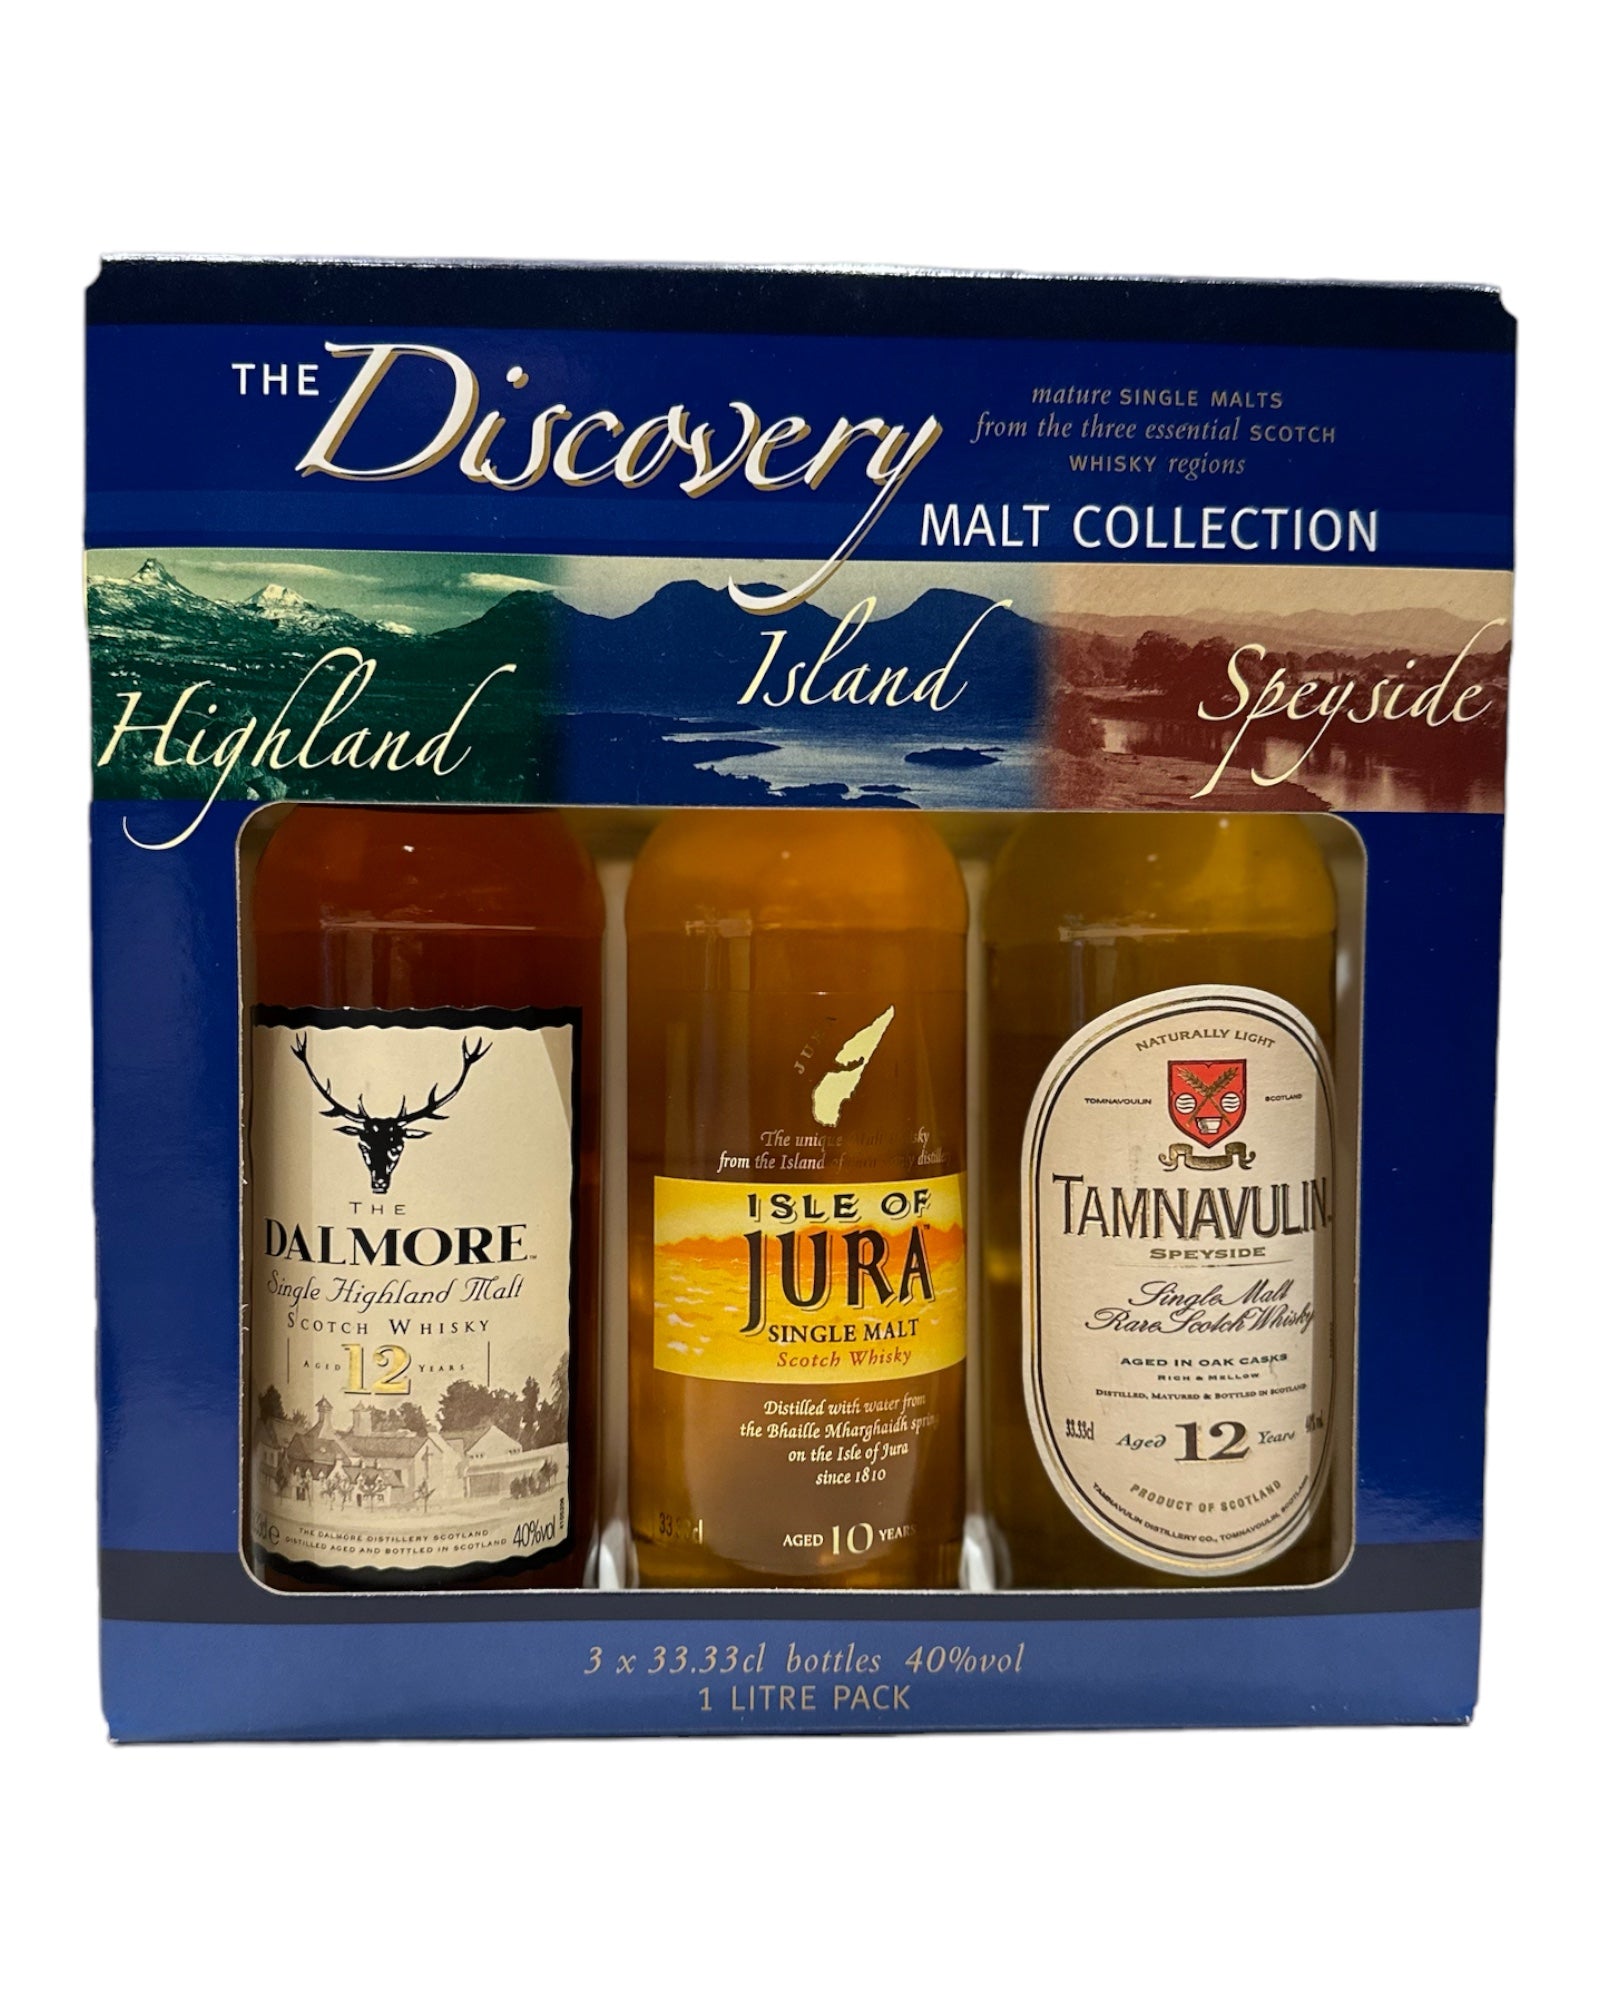 The Discovery Malt Collection Jura, Dalmore and Tamnavulin 3 x 33.33cl 40%